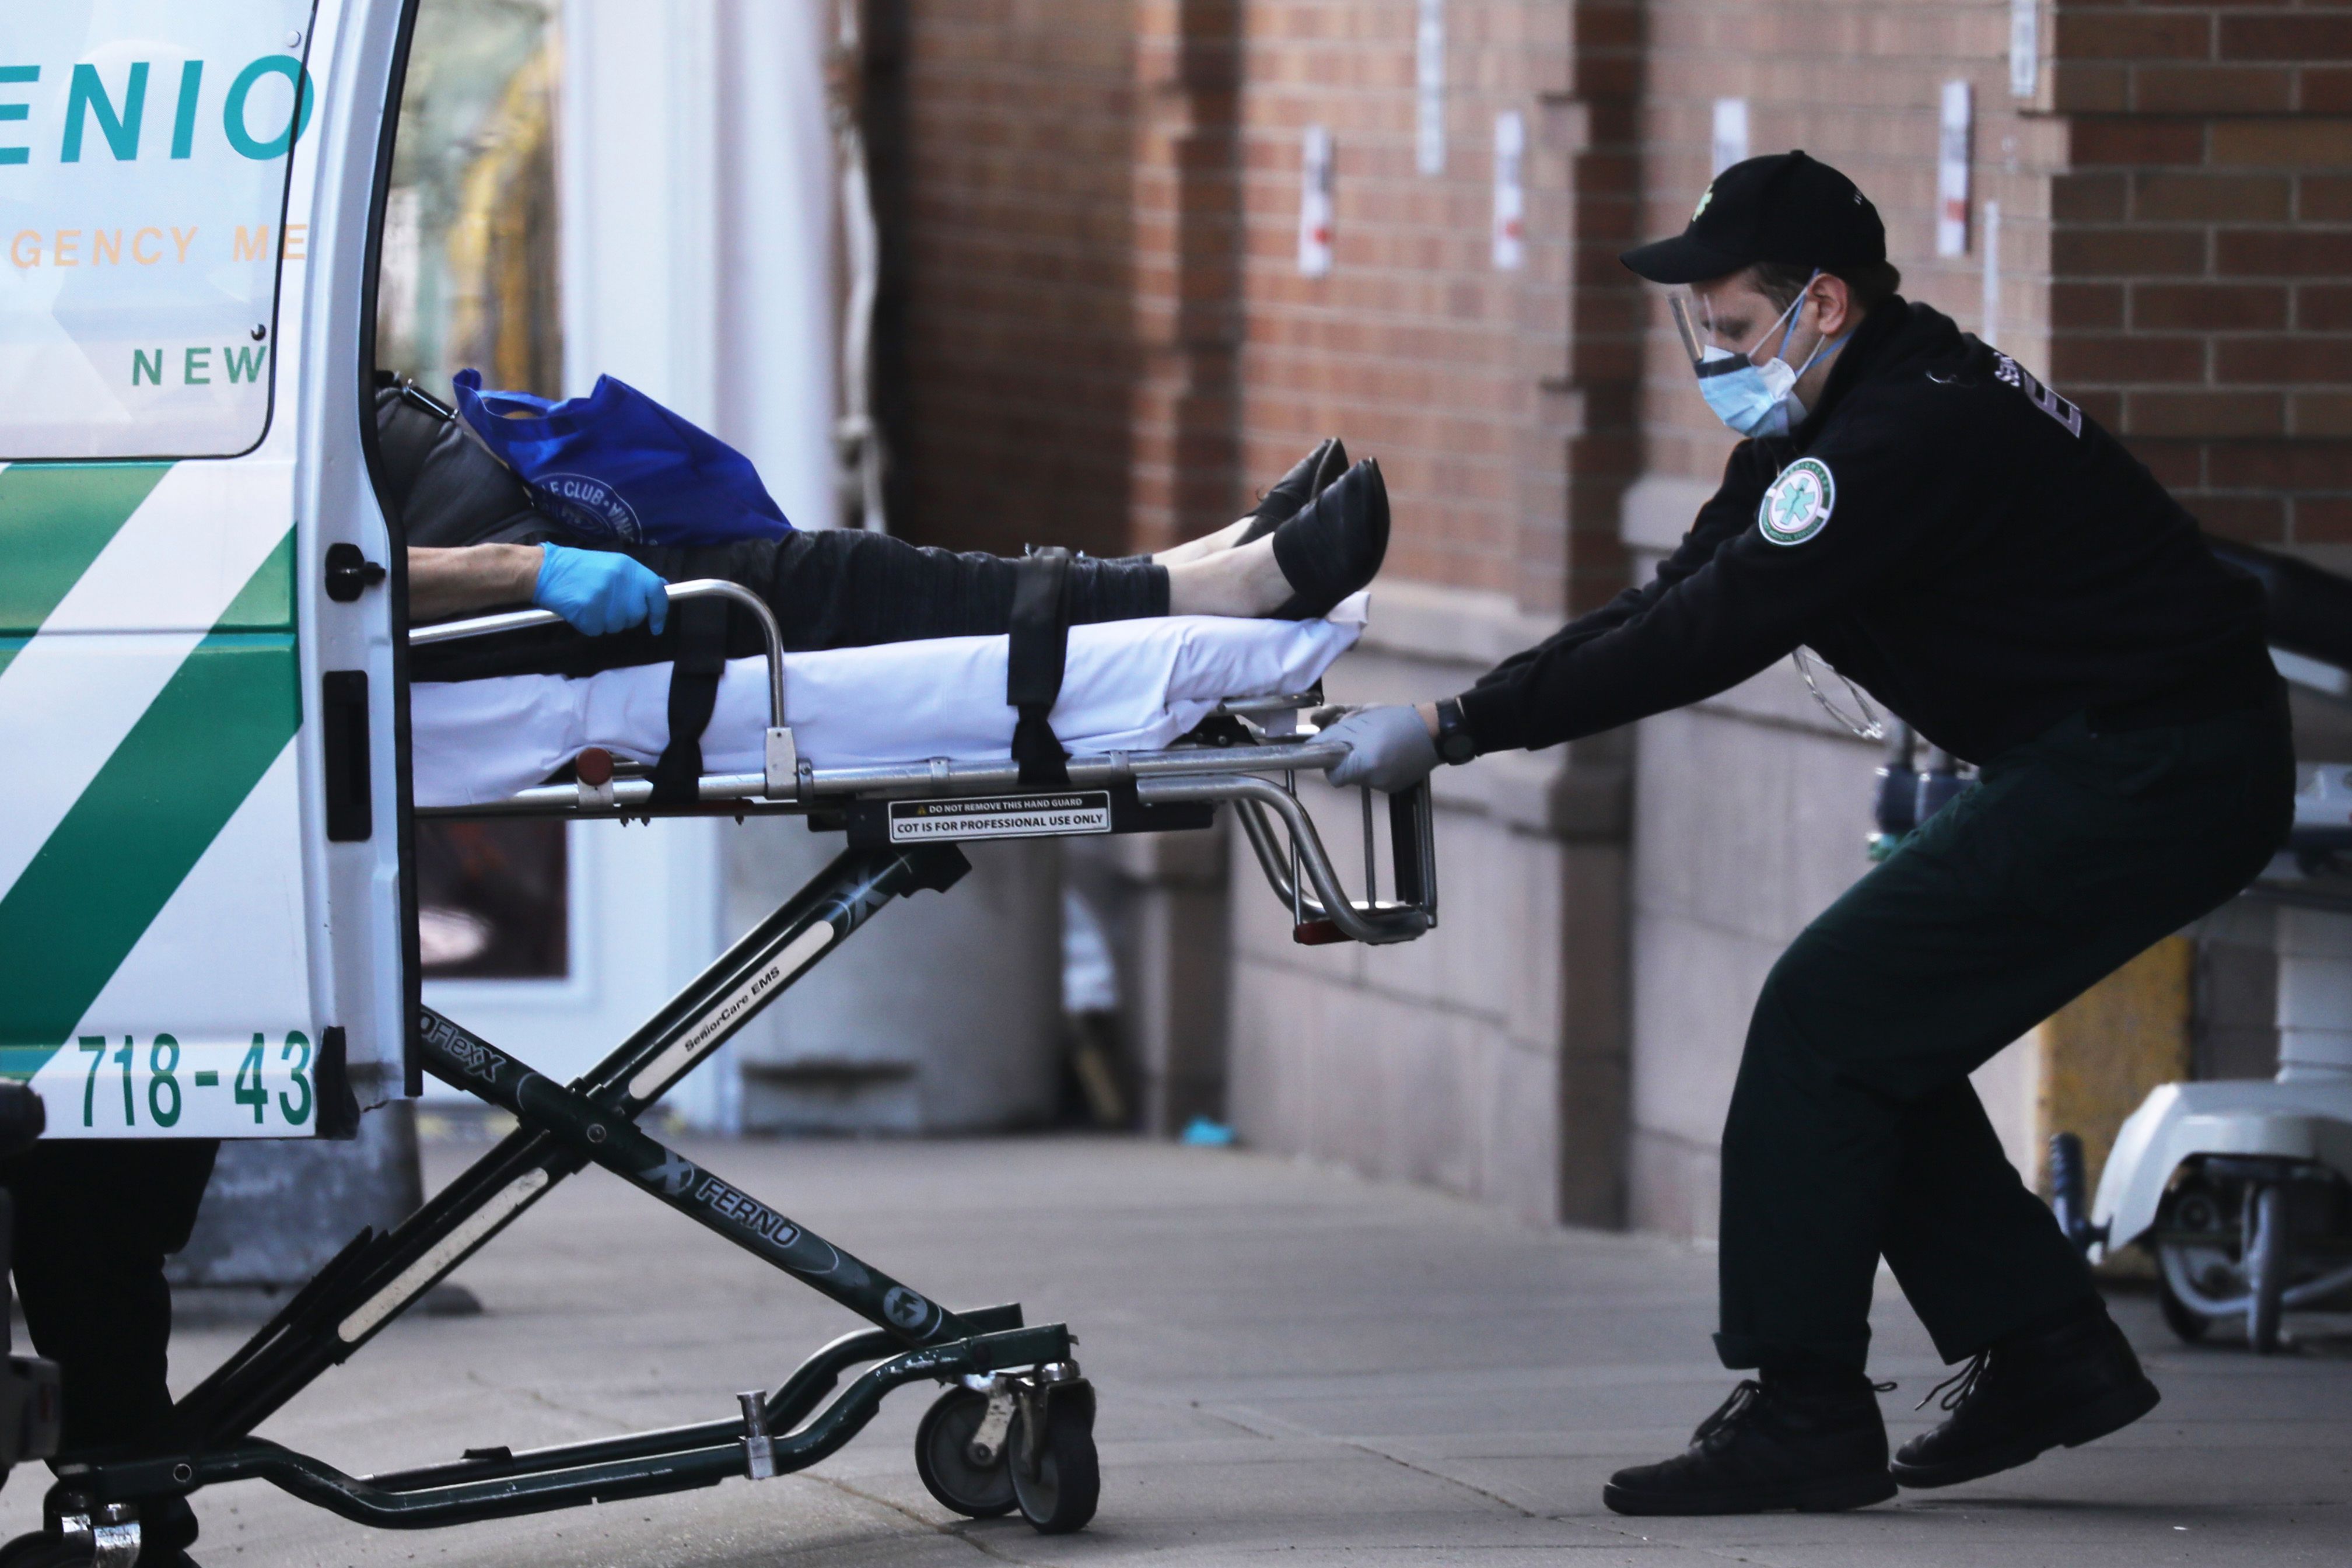 A patient is transferred at Maimonides Medical Center in Brooklyn, New York. "Srcset =" https://laopinion.com/wp-content/uploads/sites/3/2020/04/GettyImages-1220227583.jpg 4032w, https: //laopinion.com/wp-content/uploads/sites/3/2020/04/GettyImages-1220227583.jpg?resize=150,100 150w, https://laopinion.com/wp-content/uploads/sites/3/2020 /04/GettyImages-1220227583.jpg?resize=300,200 300w, https://laopinion.com/wp-content/uploads/sites/3/2020/04/GettyImages-1220227583.jpg?resize=768,512 768w, https: / /laopinion.com/wp-content/uploads/sites/3/2020/04/GettyImages-1220227583.jpg?resize=1024,683 1024w, https://laopinion.com/wp-content/uploads/sites/3/ 2020/04 / GettyImages-1220227583.jpg? Resize = 1536,1024 1536w, https://laopinion.com/wp-content/uploads/sites/3/2020/04/GettyImages-1220227583.jpg?resize=2048,1365 2048w, https://laopinion.com/wp-content/uploads/sites/3/2020/04/GettyImages-1220227583.jpg?resize=552,368 552w, https://laopinion.com/wp-content/uploads/sites / 3/2020/04 / GettyImages-12202 27583.jpg? Resize = 1200,800 1200w, https://laopinion.com/wp-content/uploads/sites/3/2020/04/GettyImages-1220227583.jpg?resize=50,33 50w "sizes =" ( max-width: 940px) 100vw, 940px